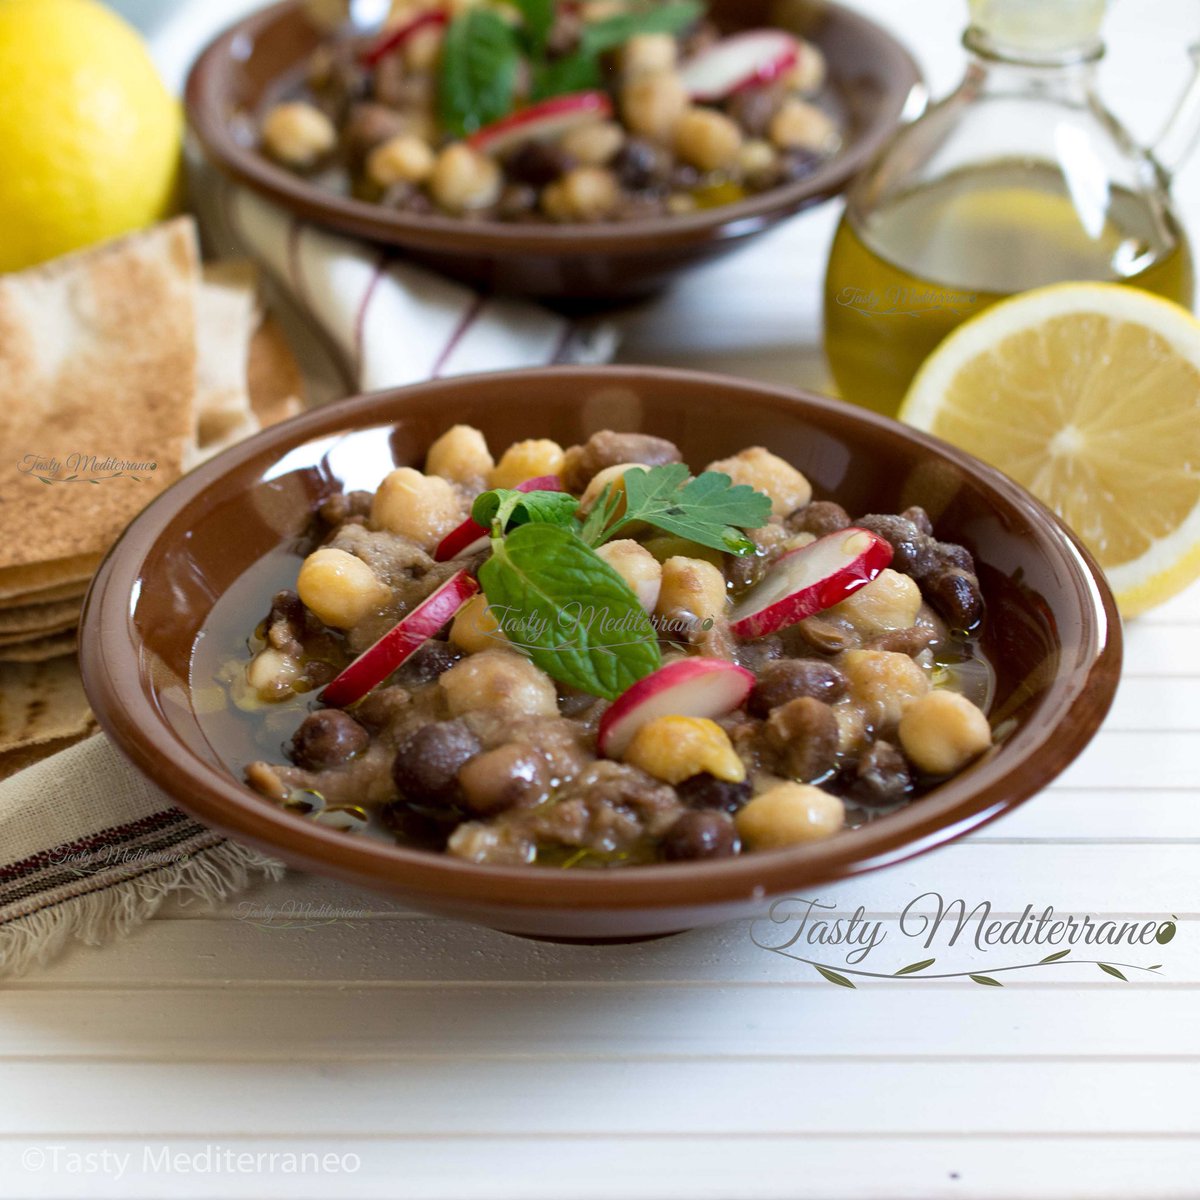 3 years ago I attended the 1st #WorldPulsesDay @UN in New York. You can find plenty of healthy #vegetarian & #vegan recipes from the #MediterraneanDiet with #pulses on #tastymediterraneo 👉tastymediterraneo.com Let’s celebrate with a dish with pulses today #EVOO #5aday